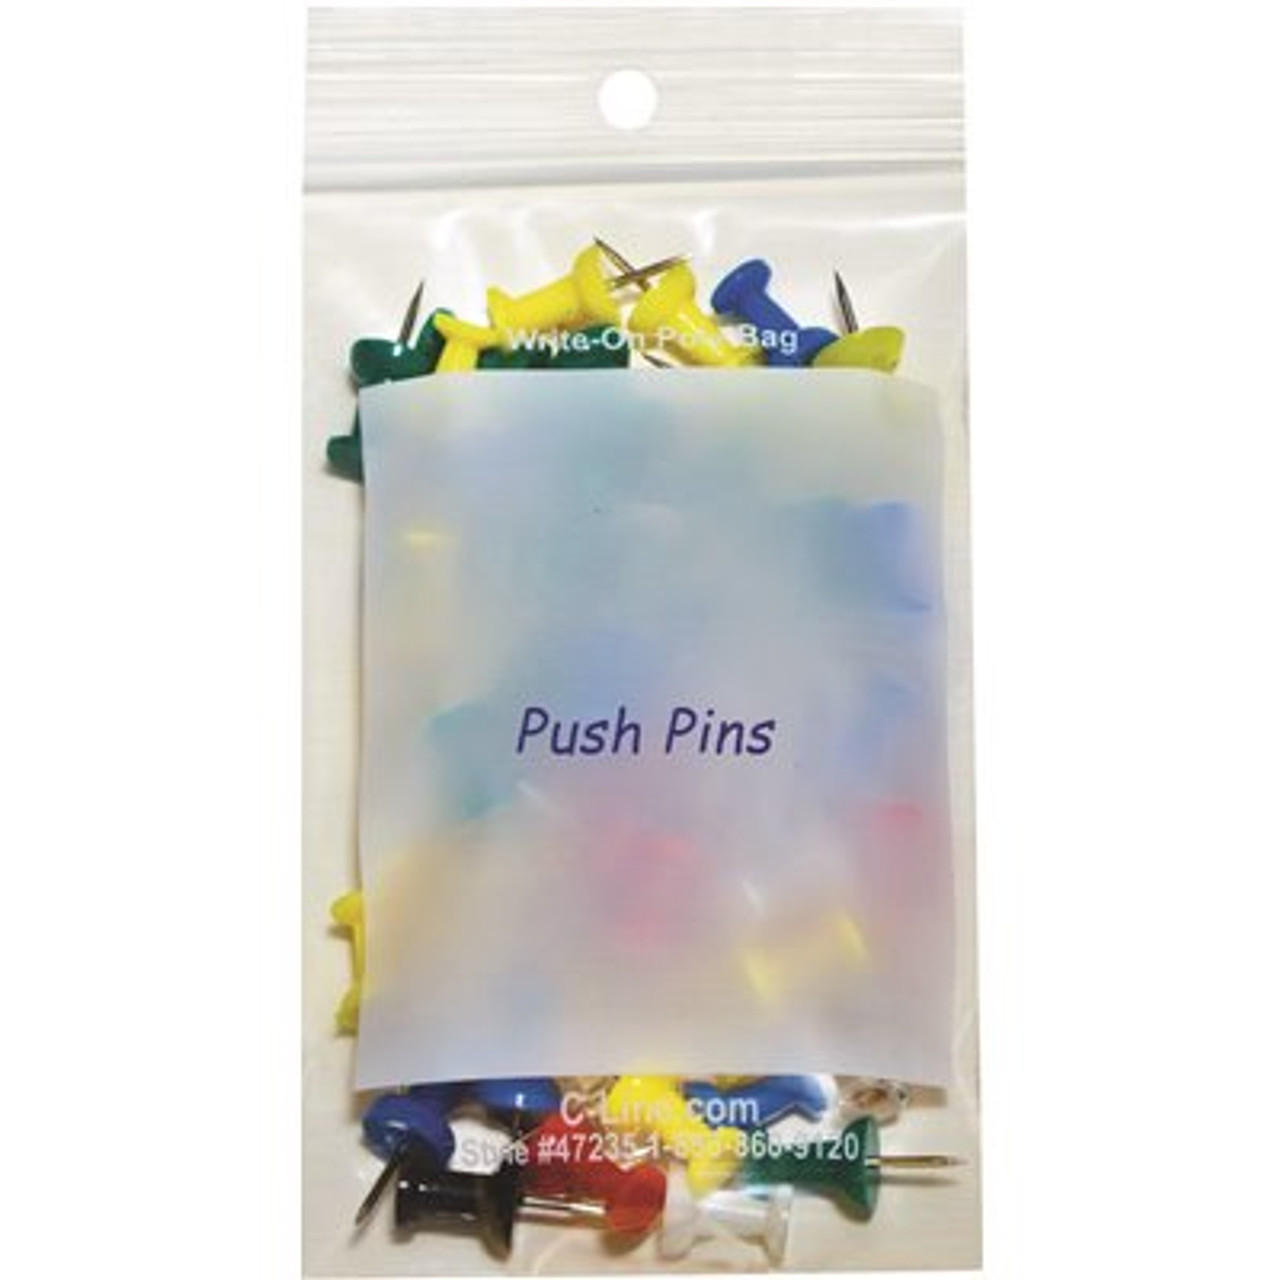 C-Line Write-On Small Parts Bags